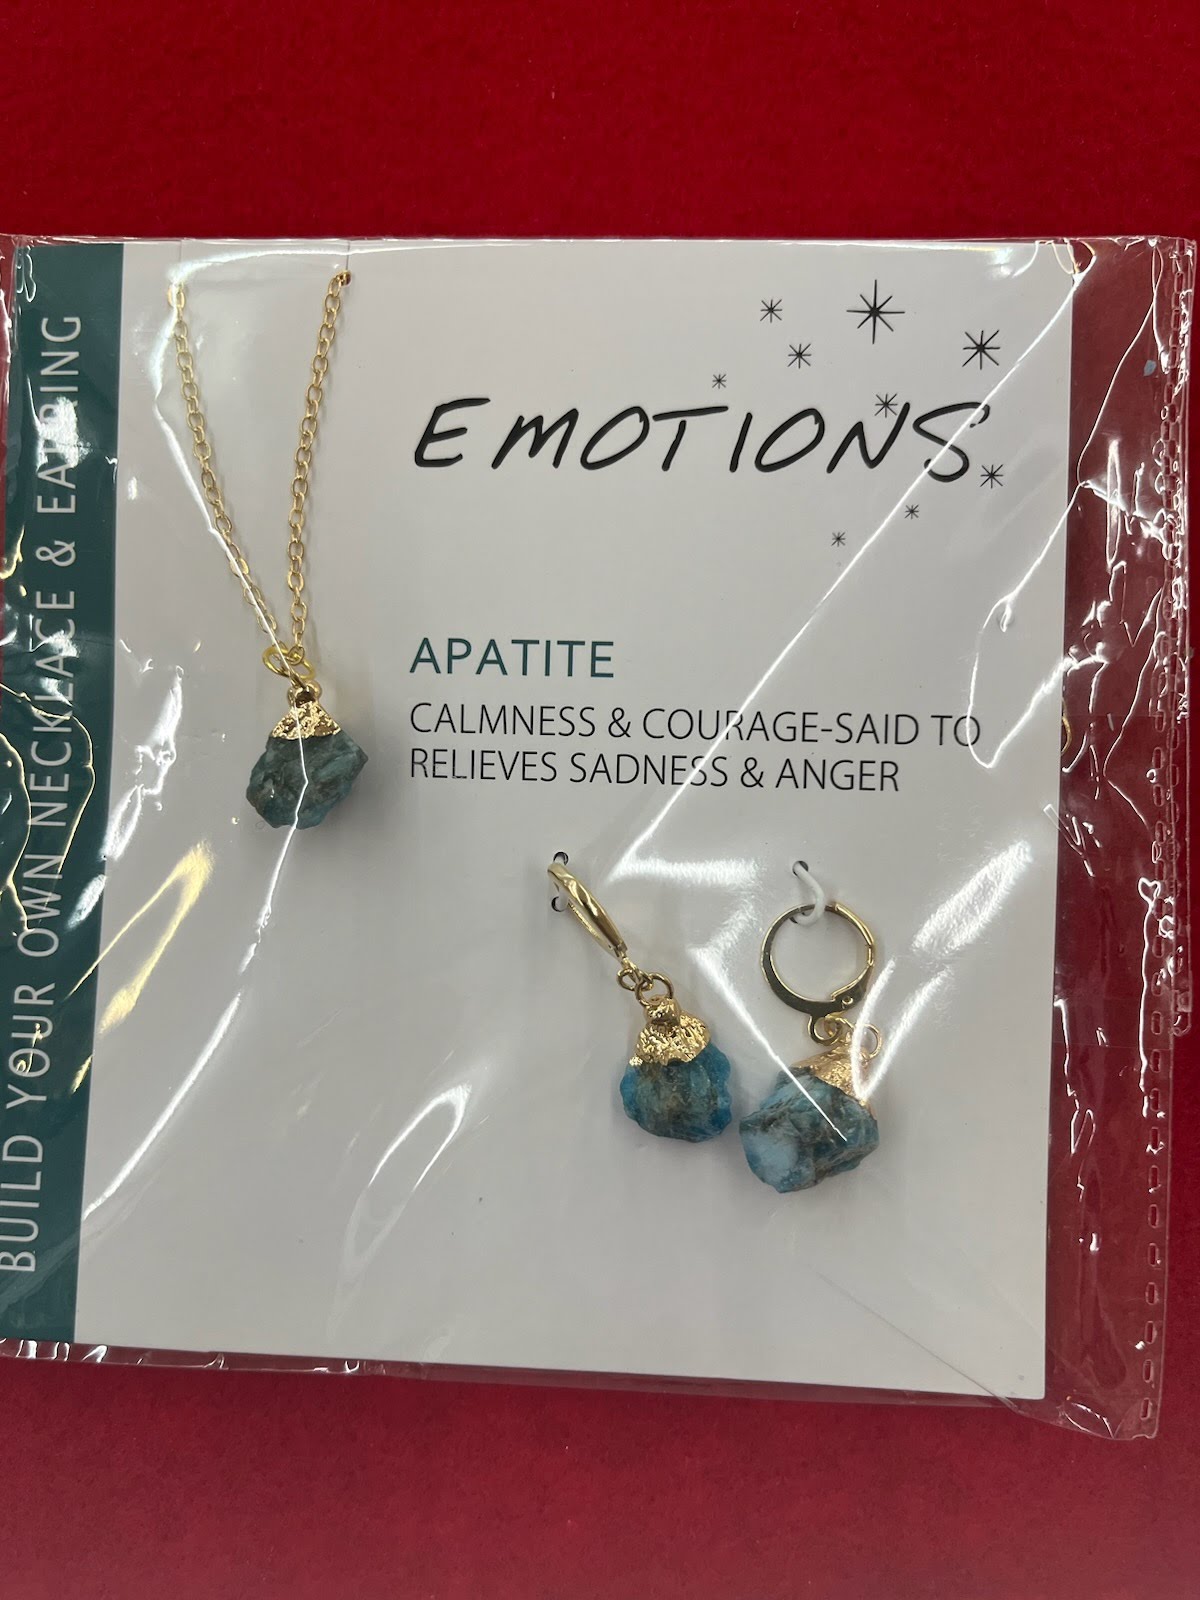 A package of jewelry with the words " emotions apatite."